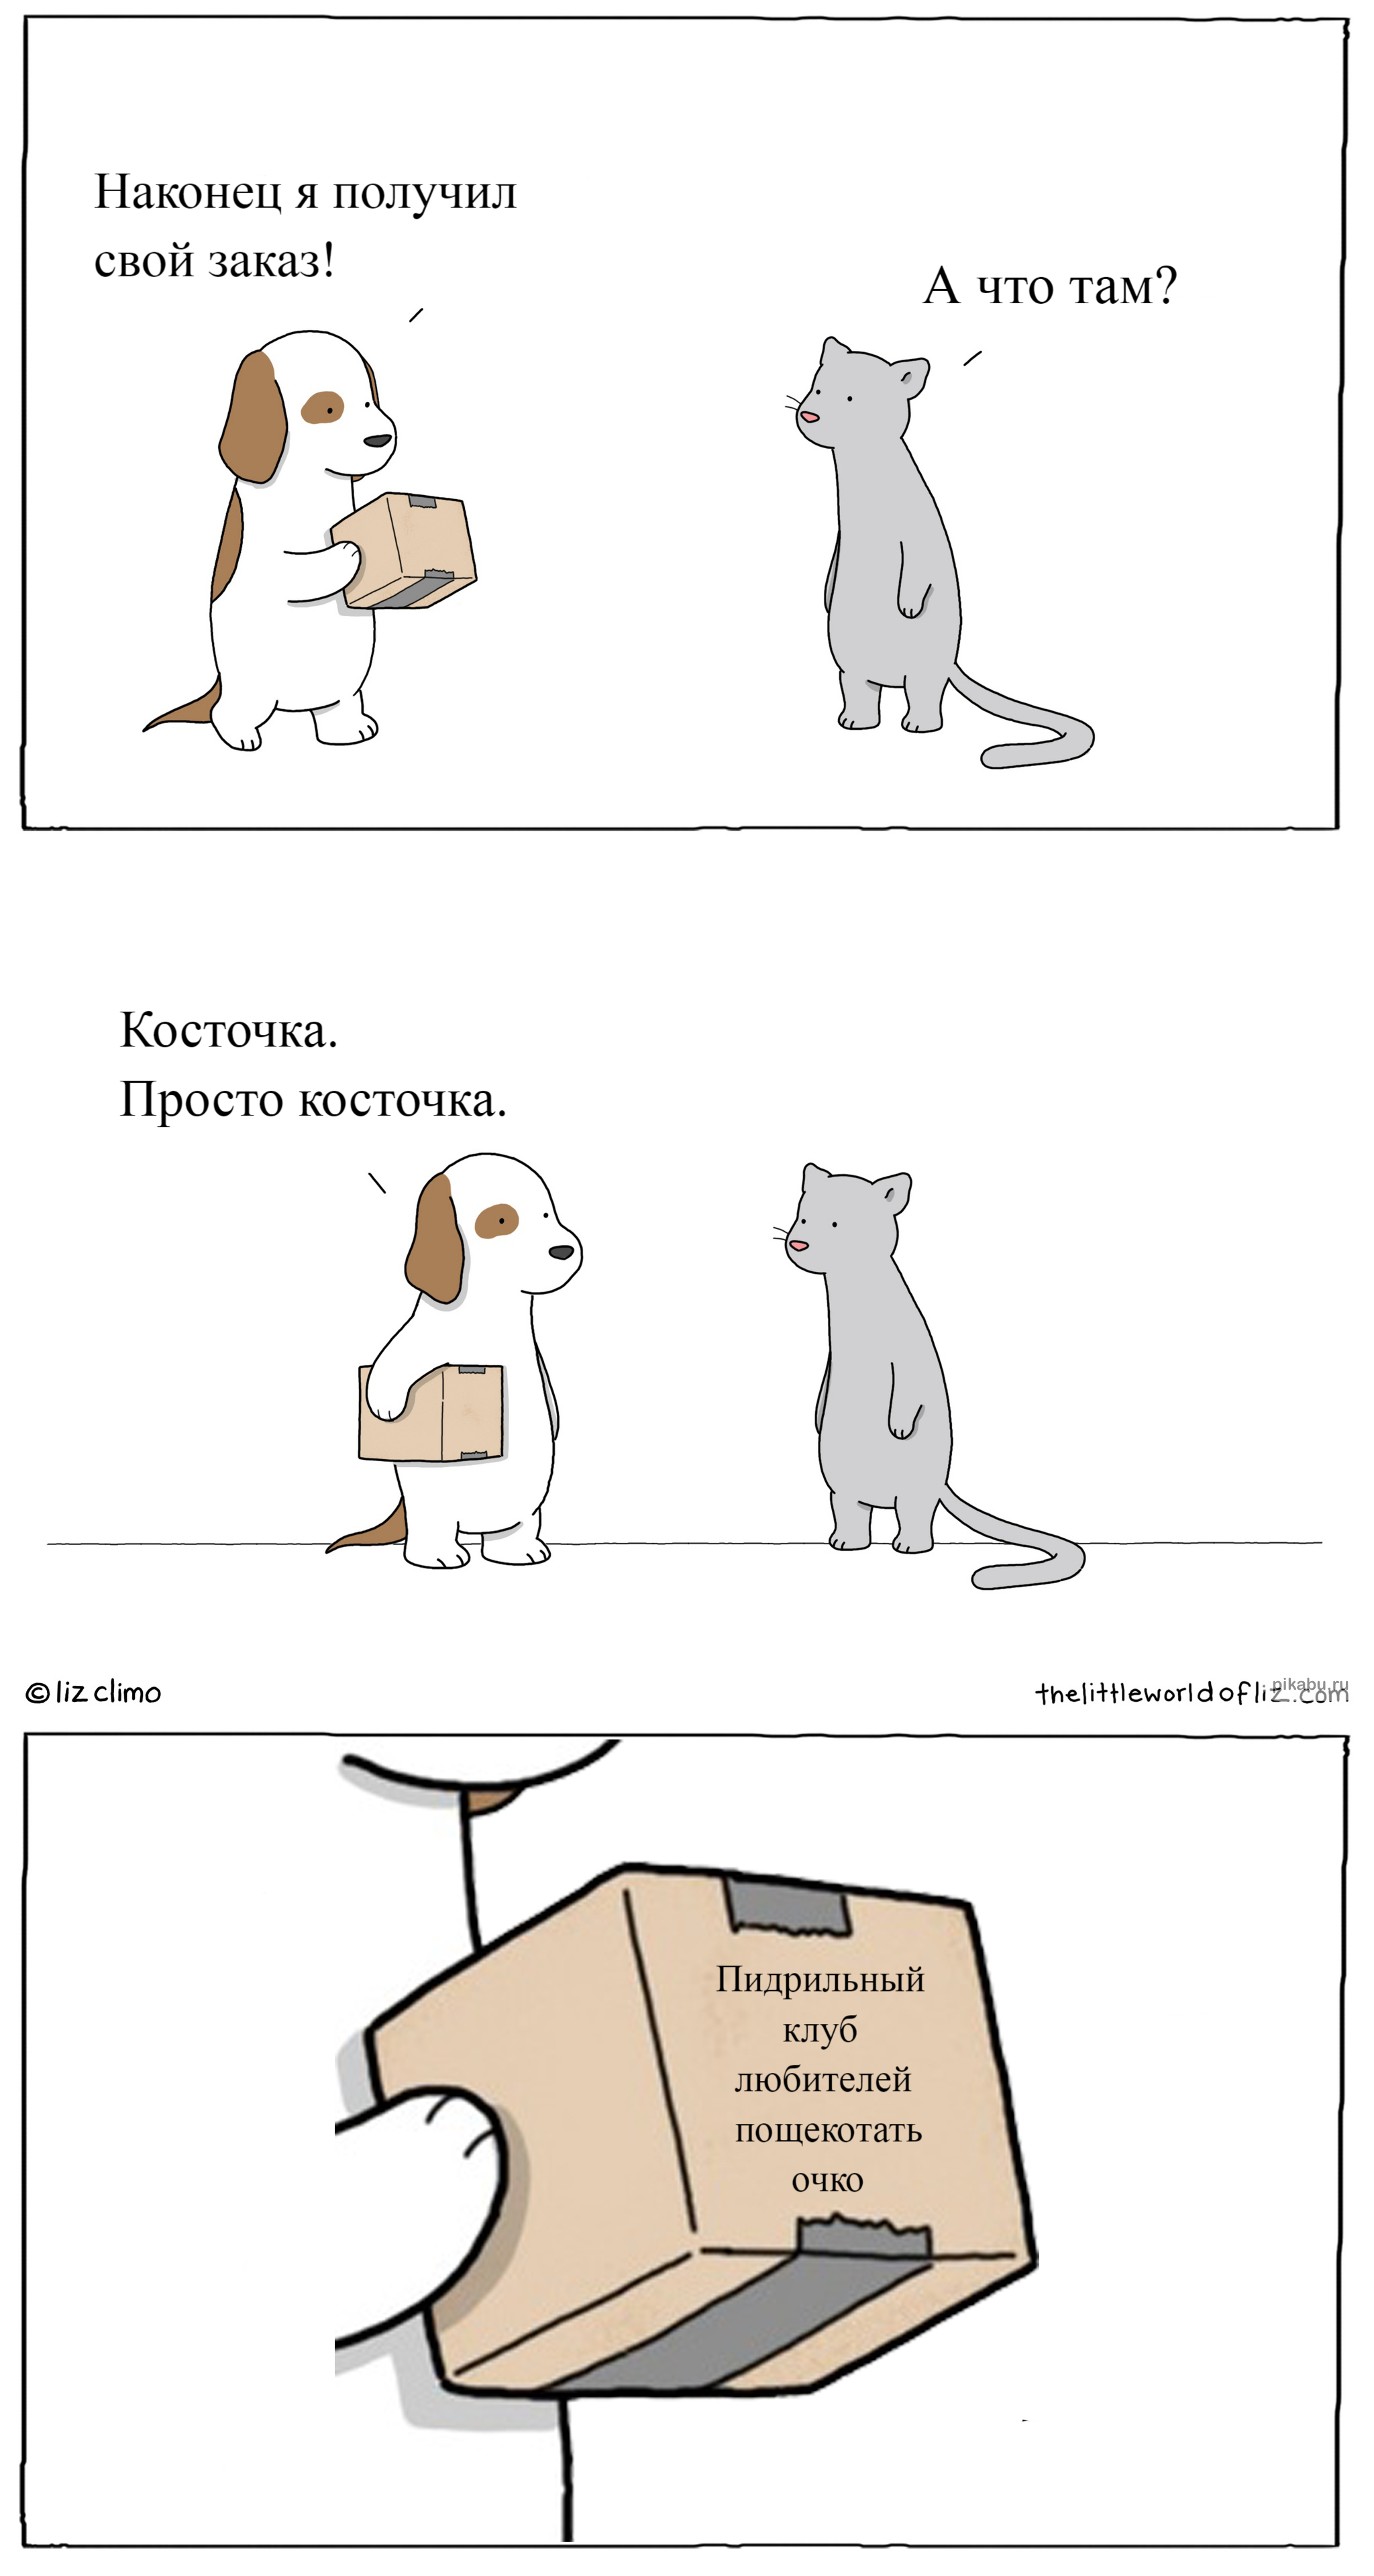 Reply to the post So unexpected and nice ... - Comics, Lizclimo, Dog, cat, Package, Presents, Humor, Order, Translated by myself, Remake, Money card two barrels, Dmitry Puchkov, Reply to post